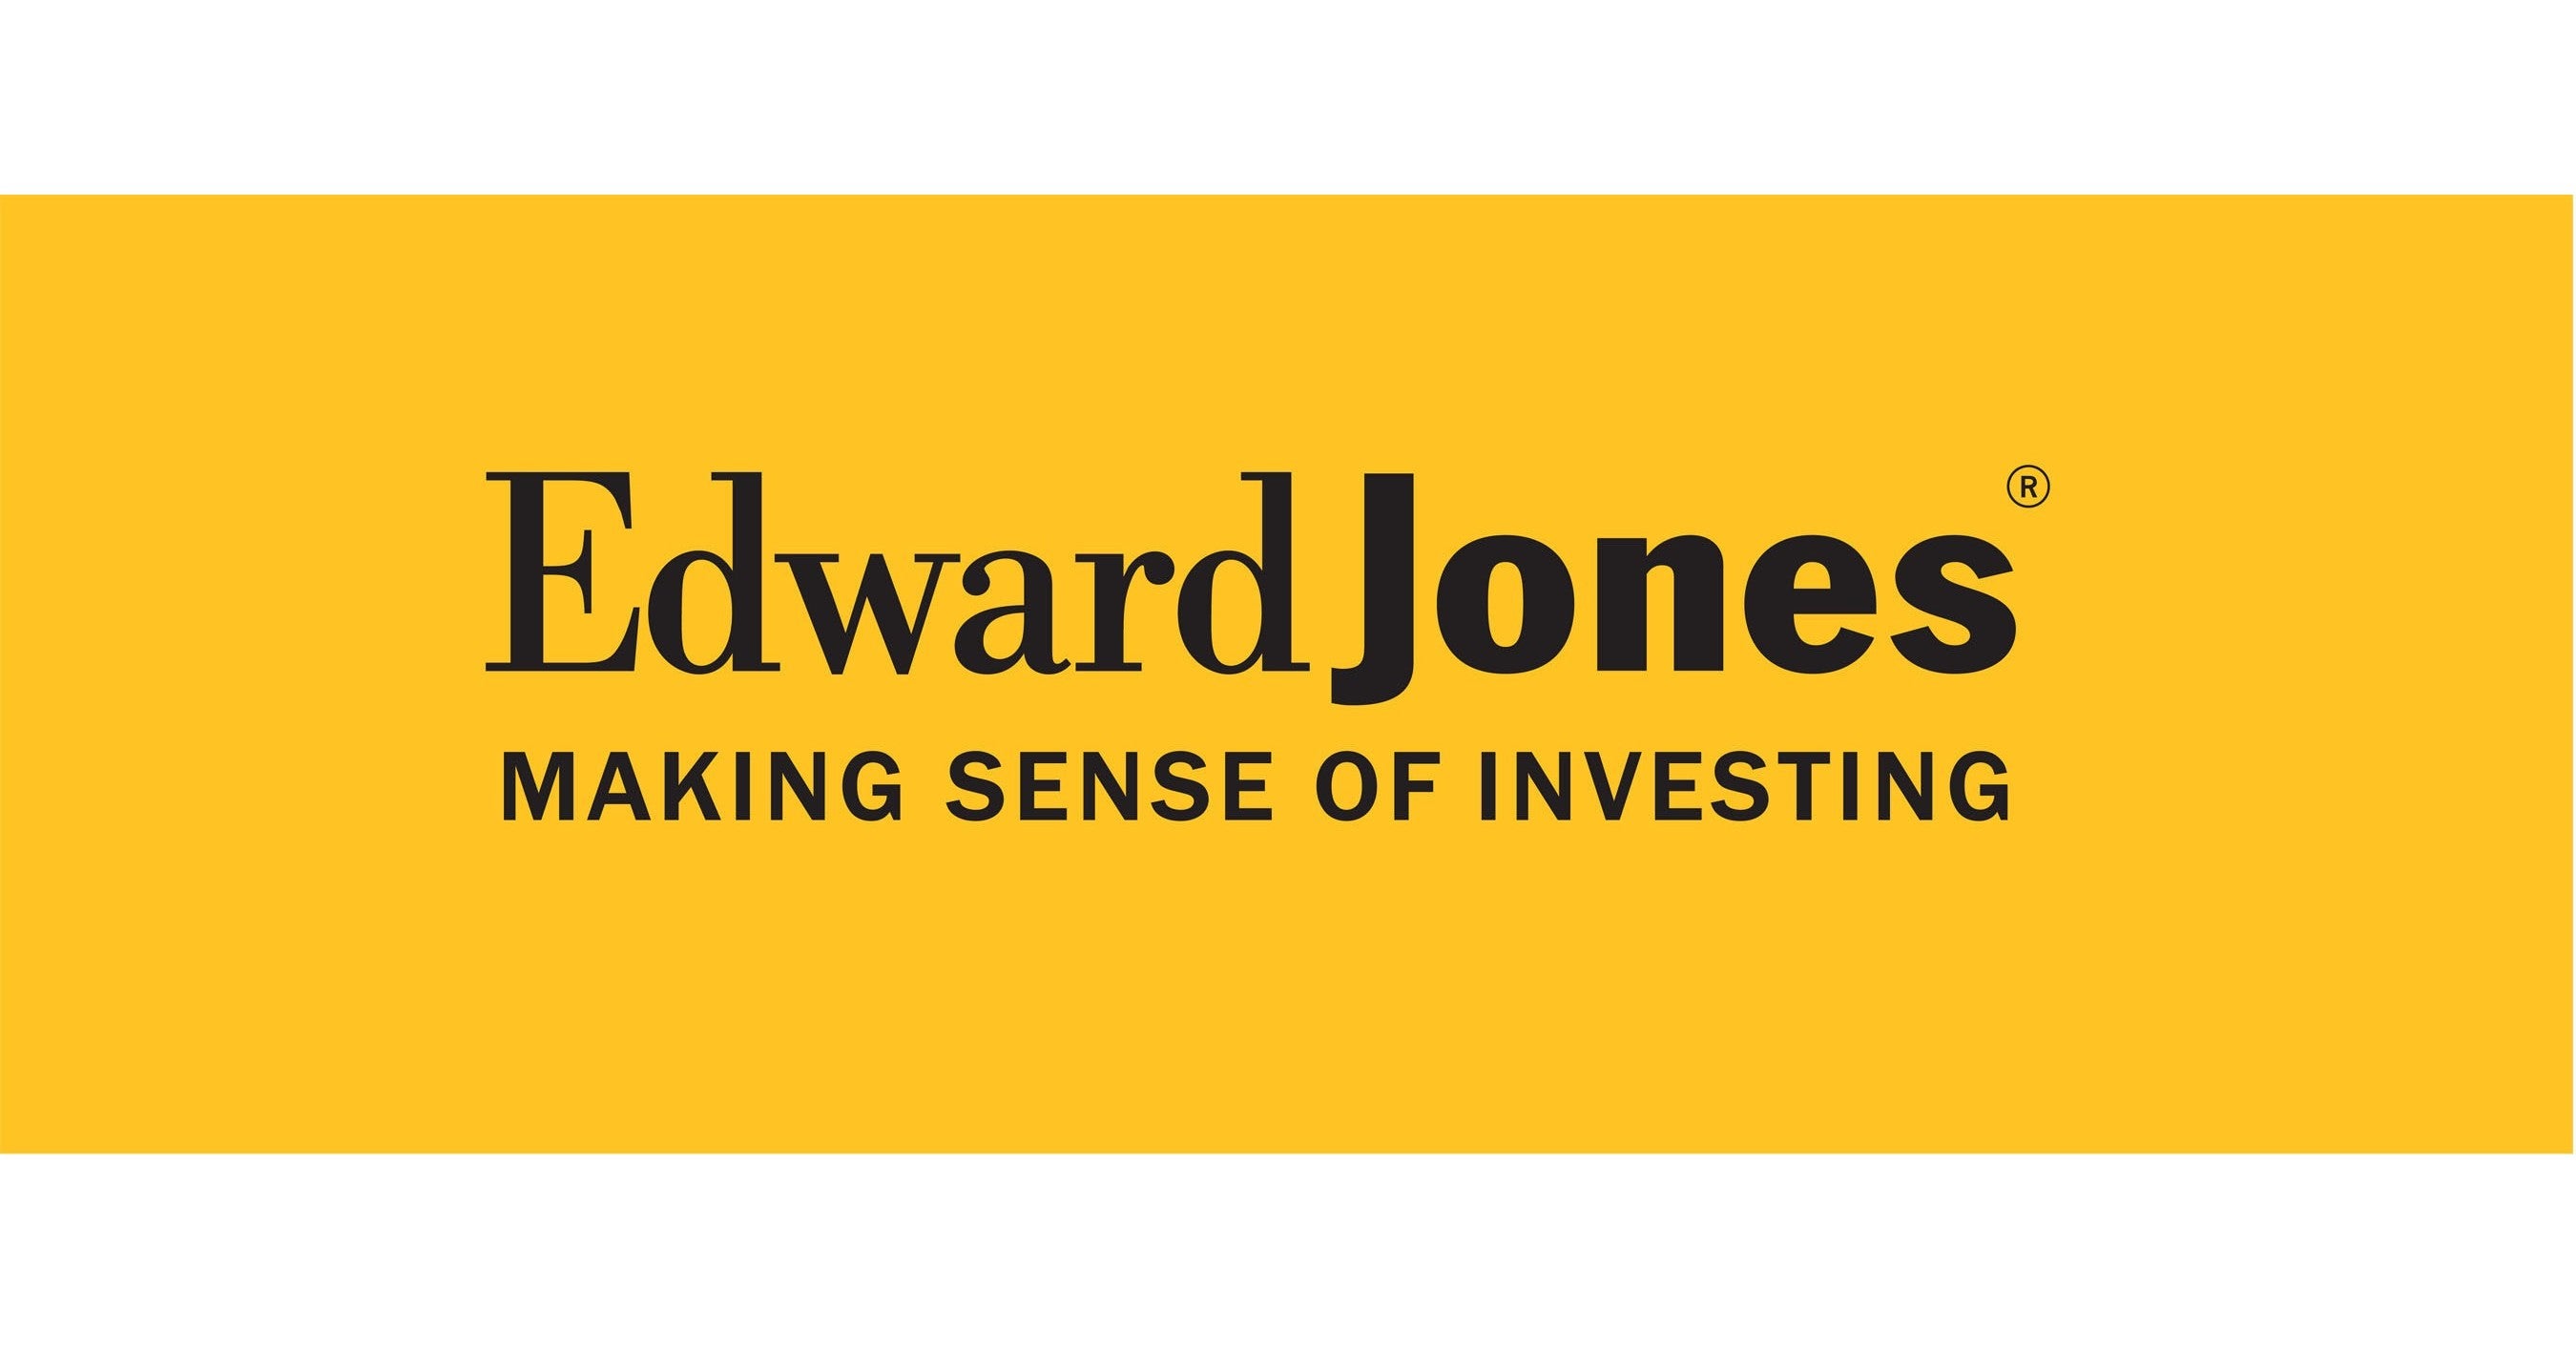 Local Edward Jones branch team qualifies for BOA Conference www